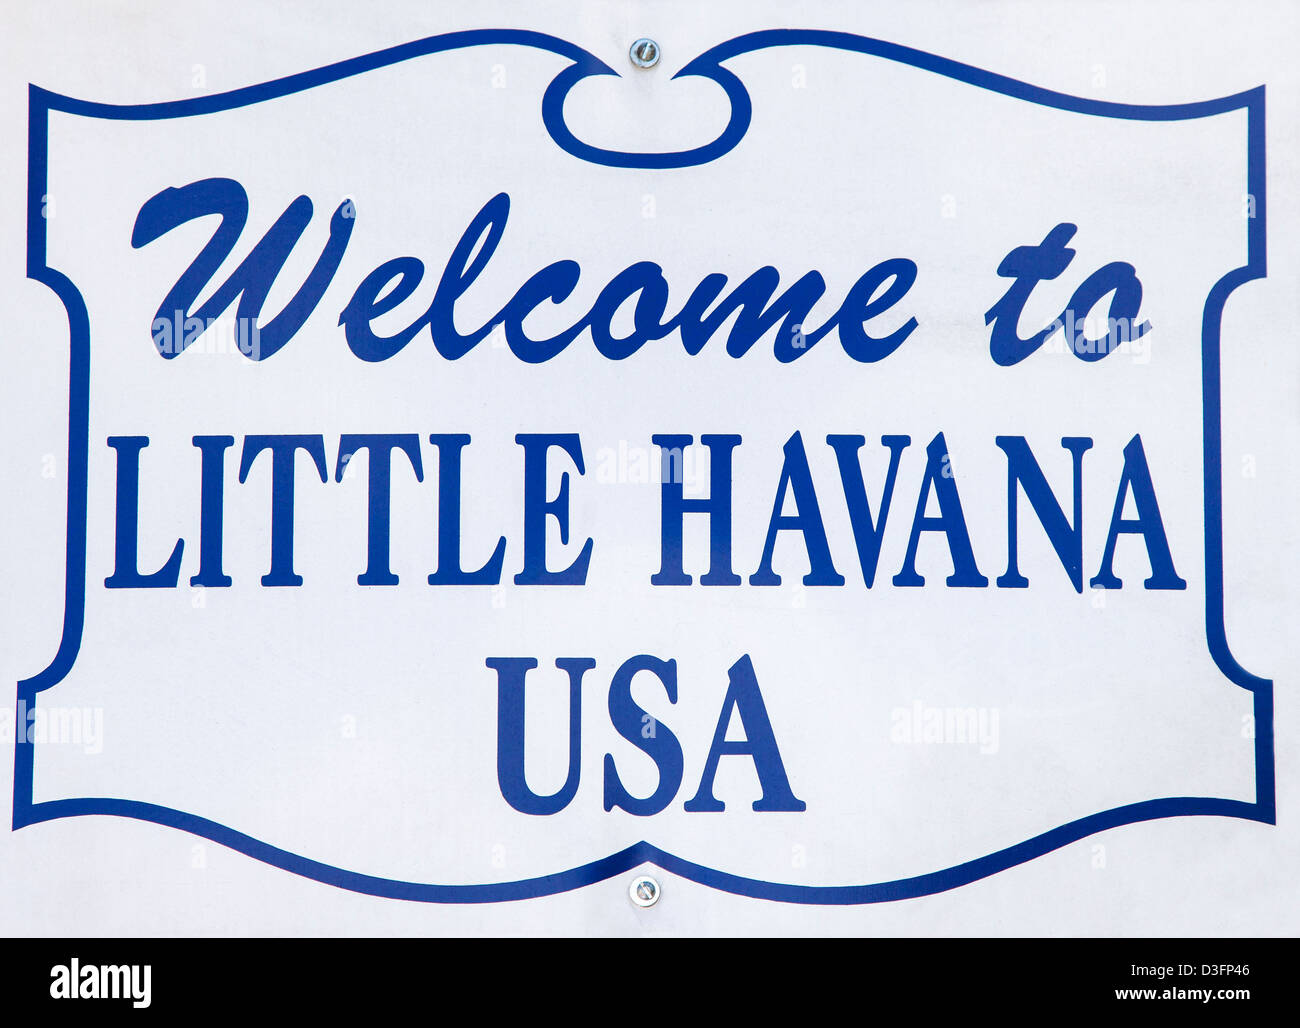 Welcome to Little Havana Sign, Miami, USA Stock Photo